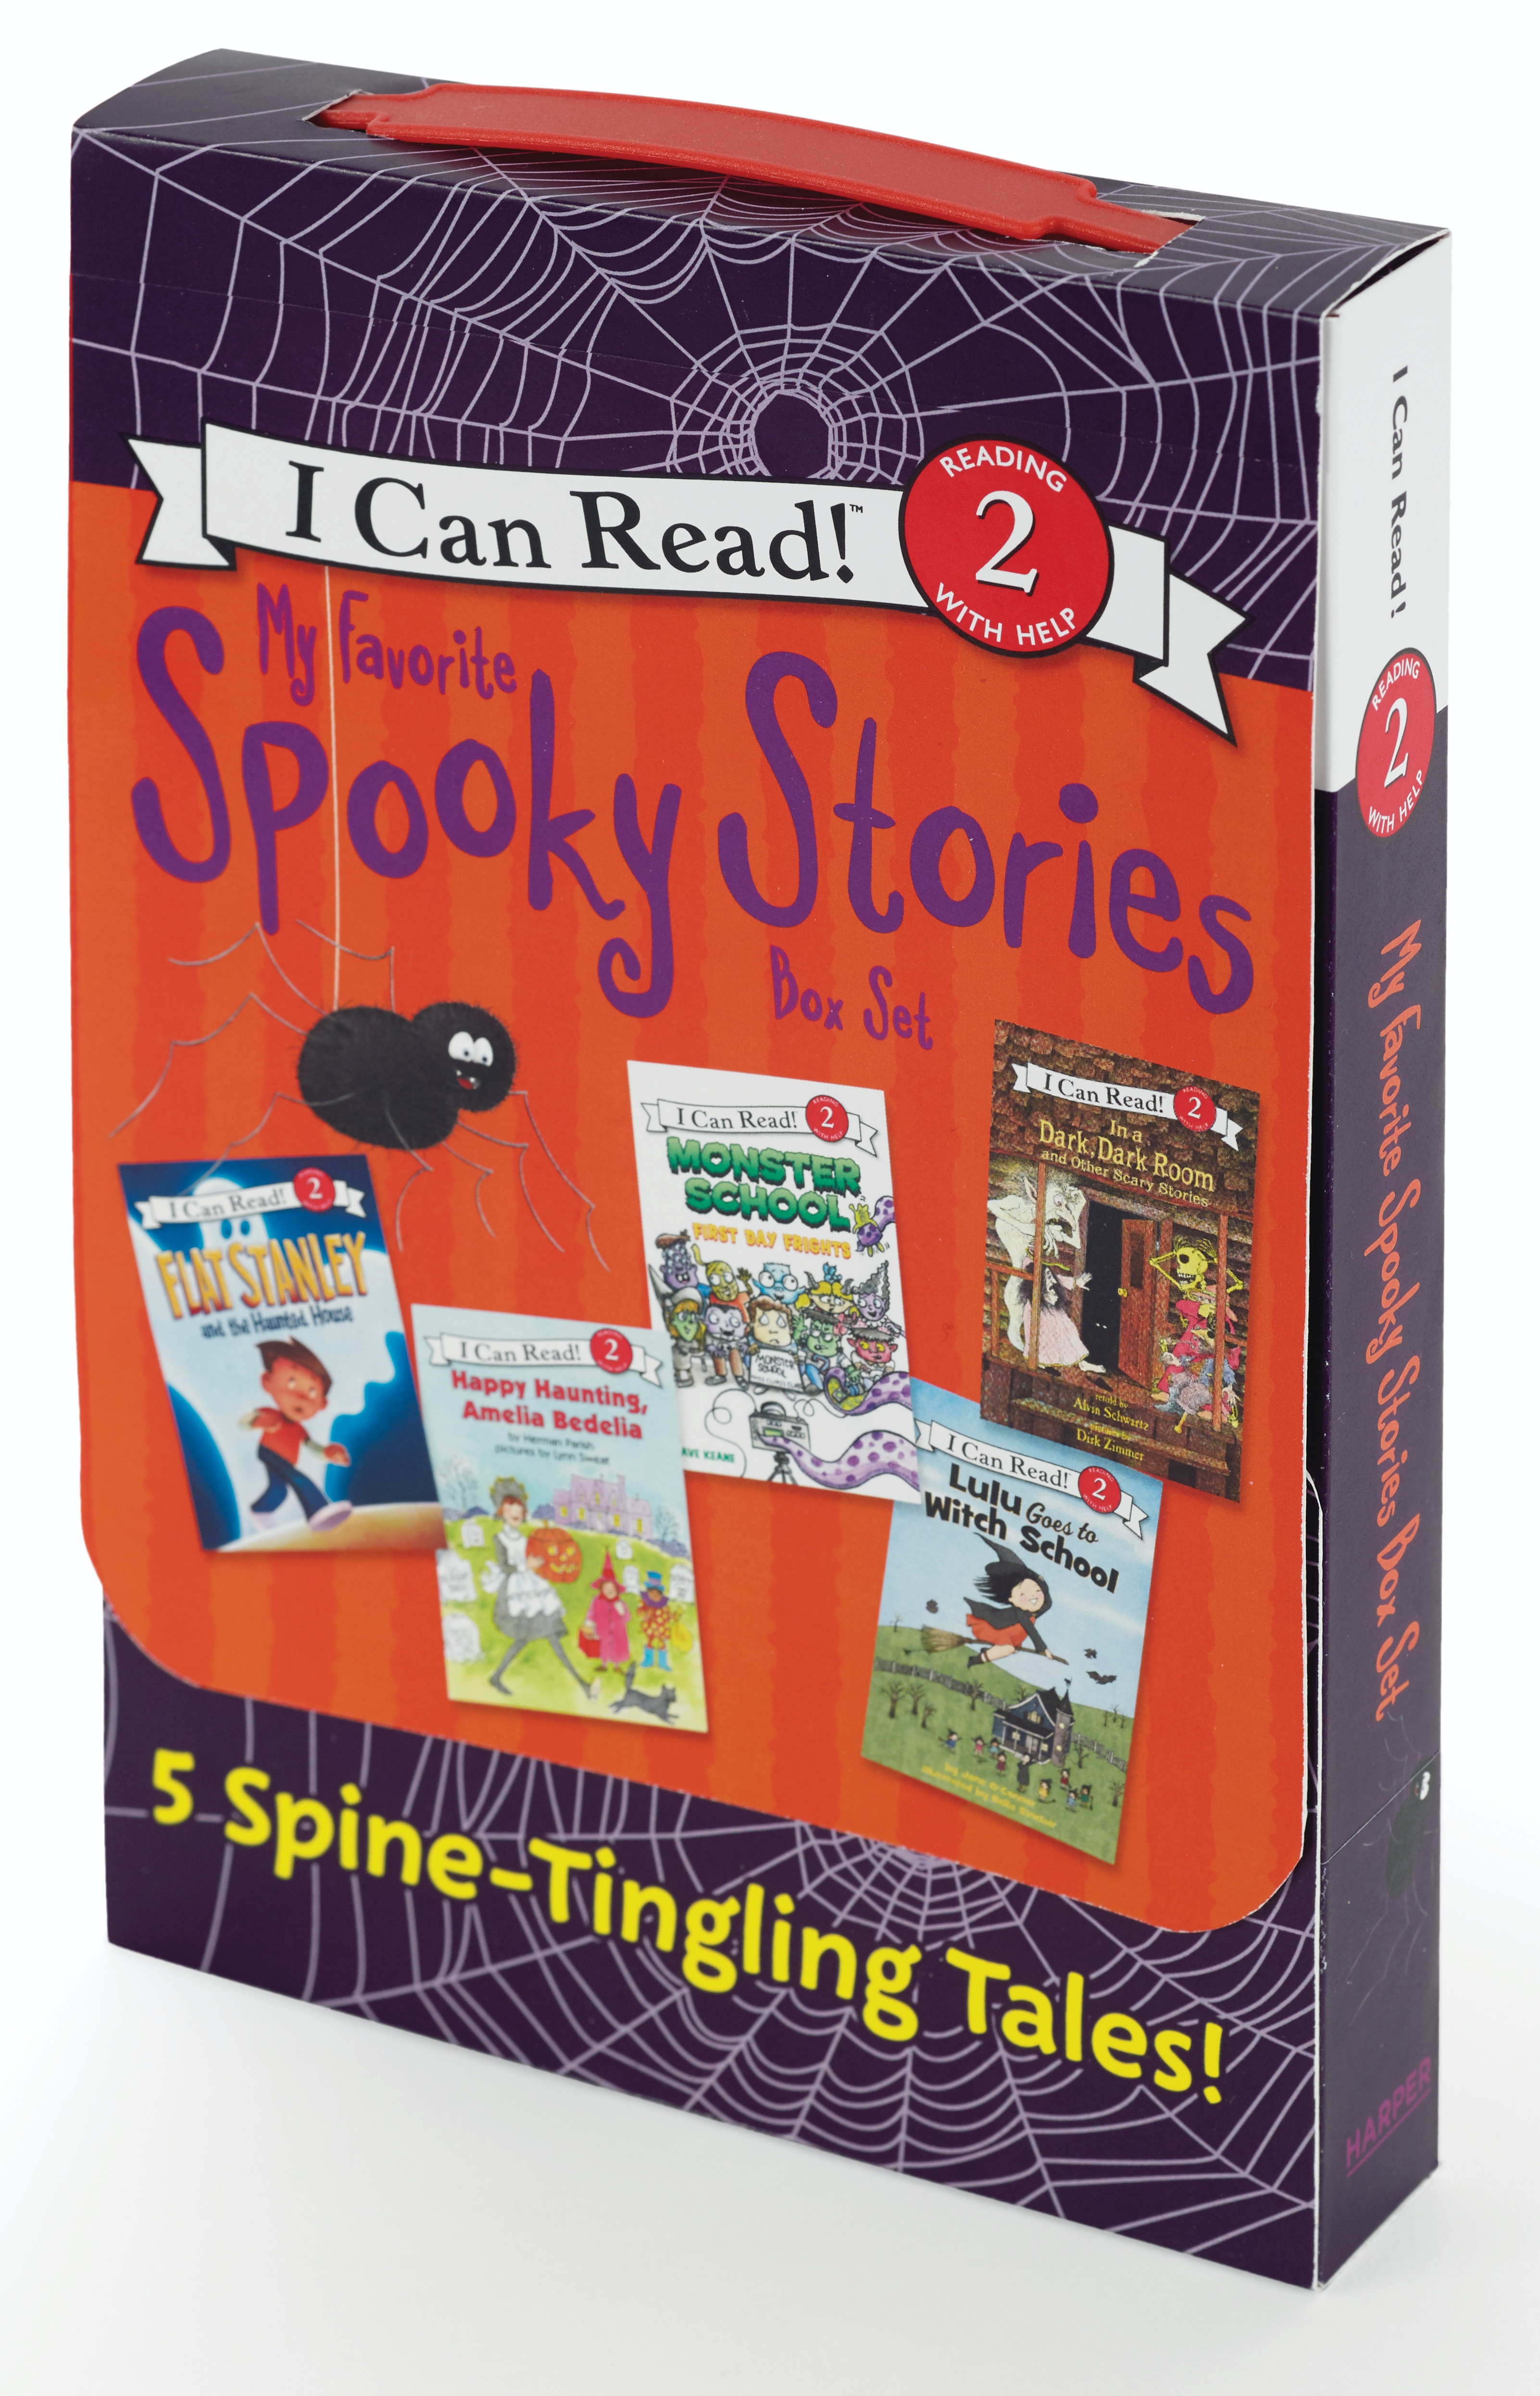 Buy My Favorite Spooky Stories Box Set 5 Silly Not Too